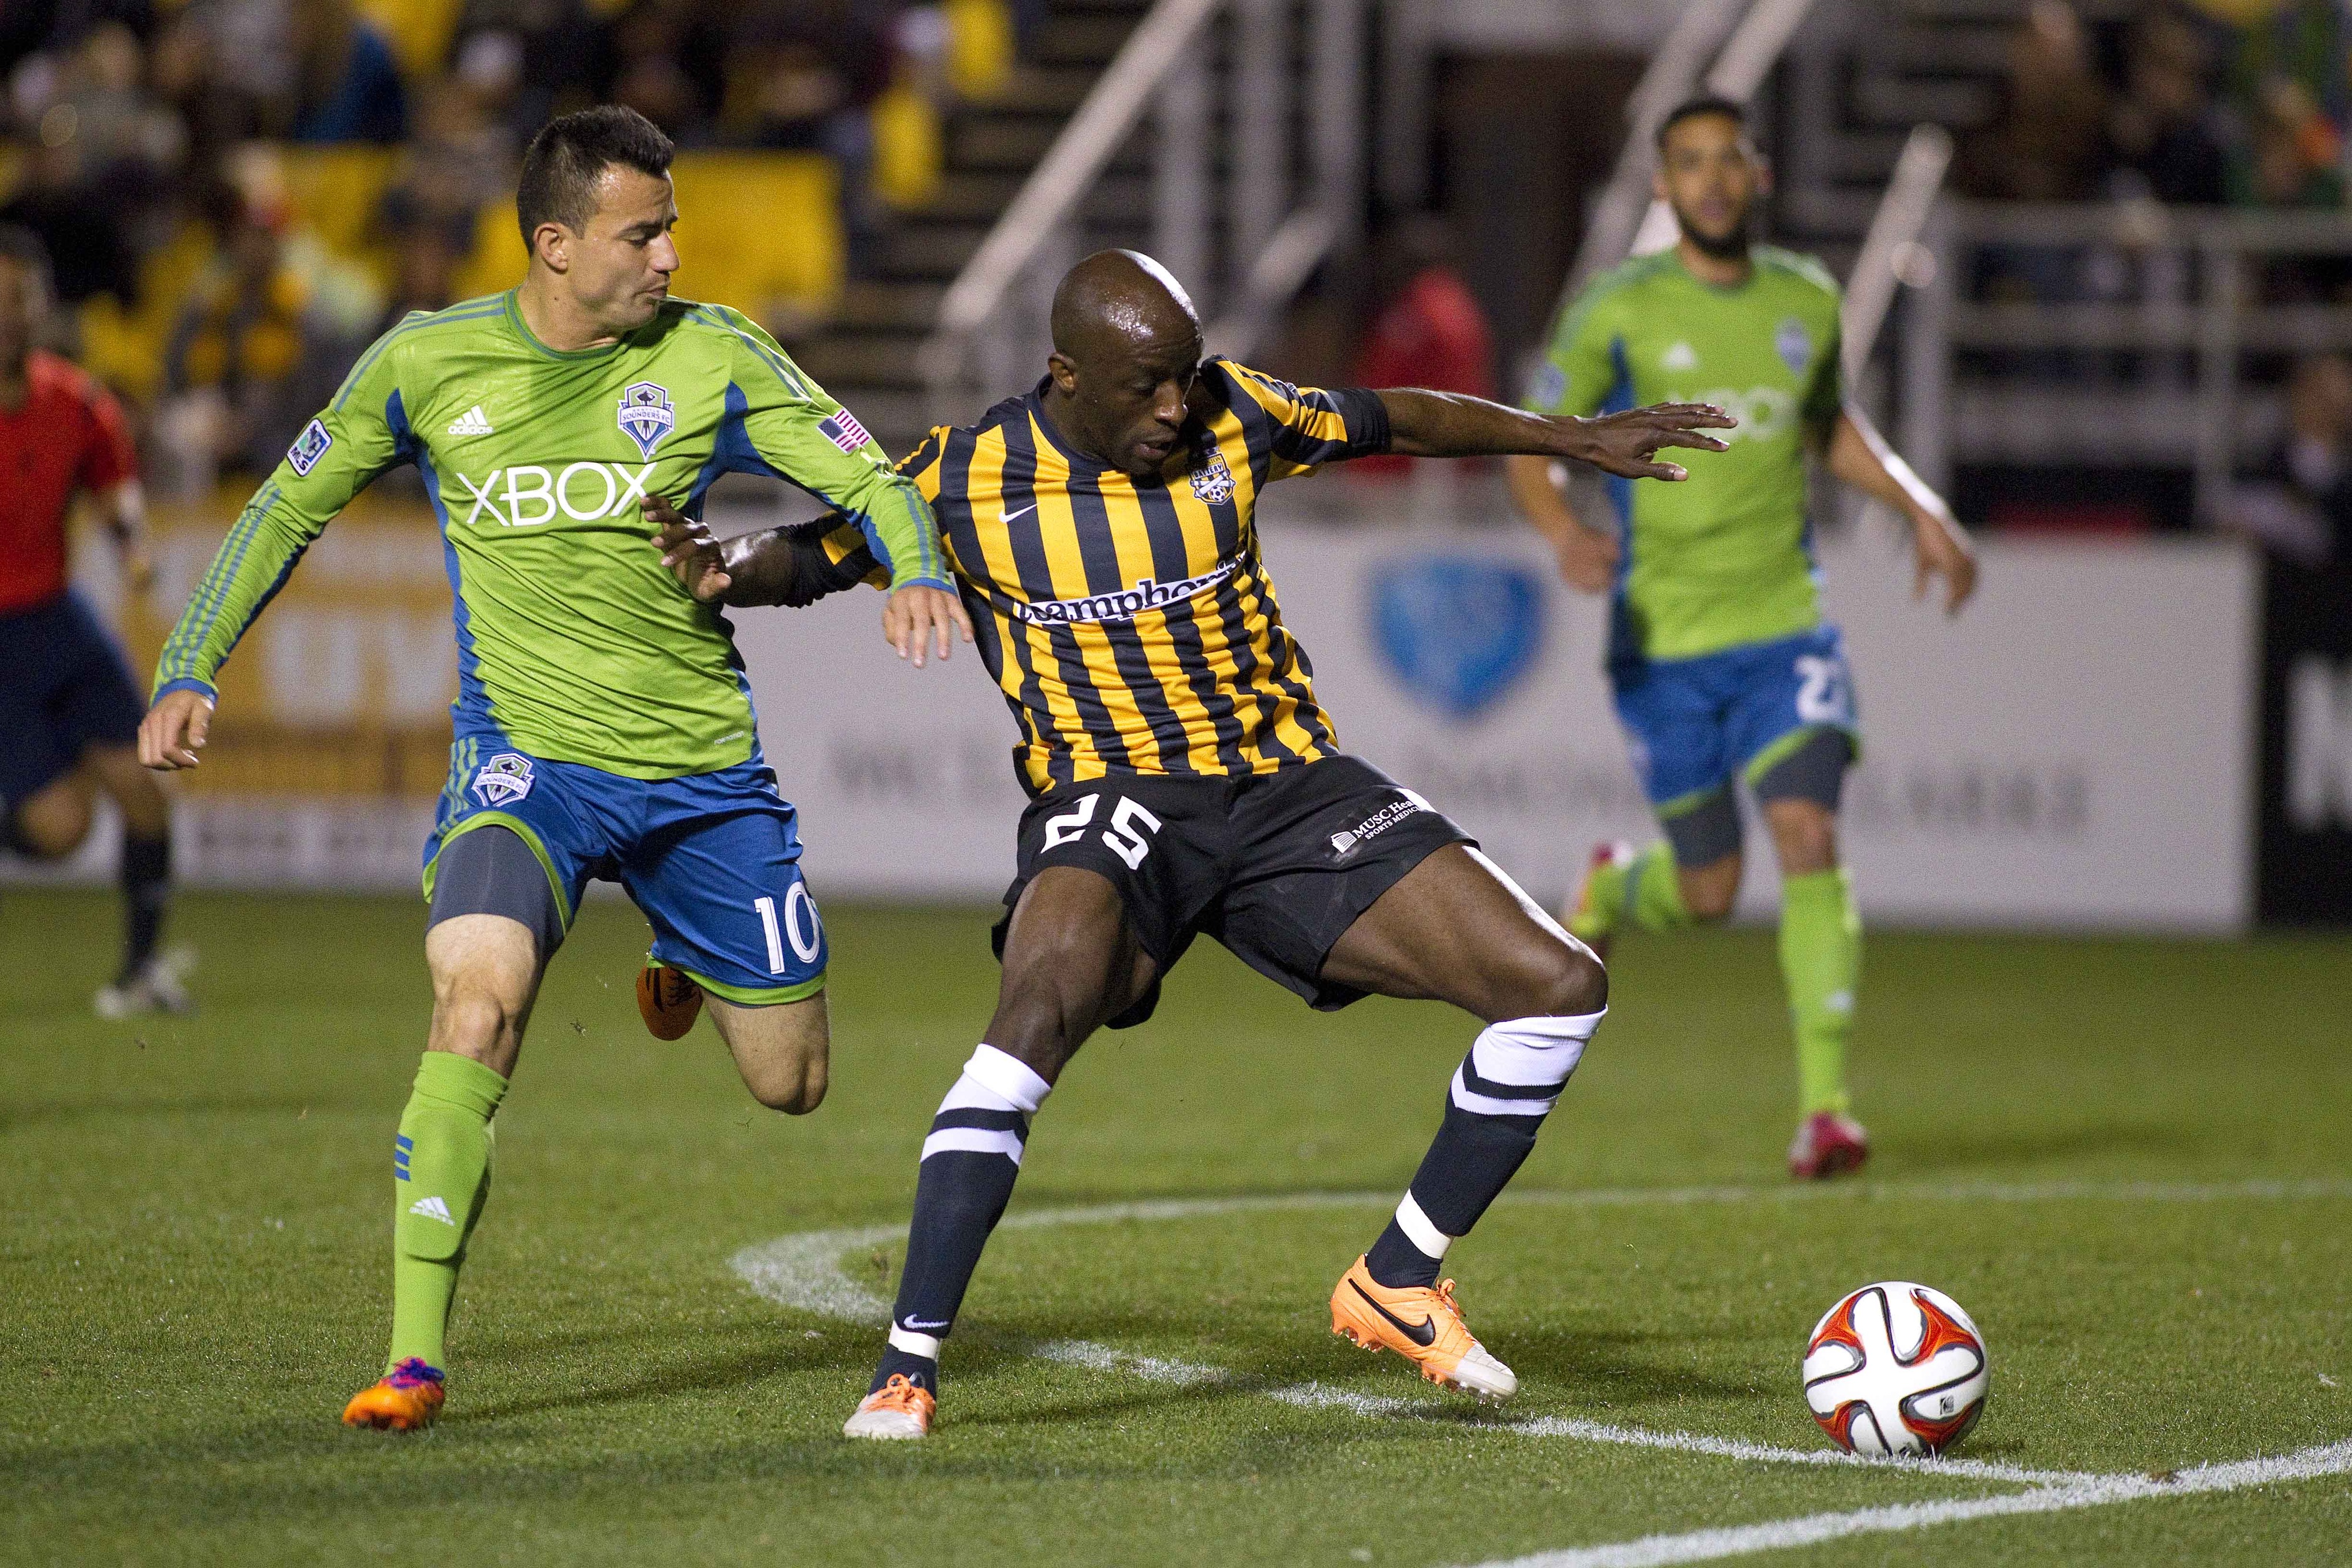 United faces former DCU defender John Wilson and the Charleston Battery tonight.